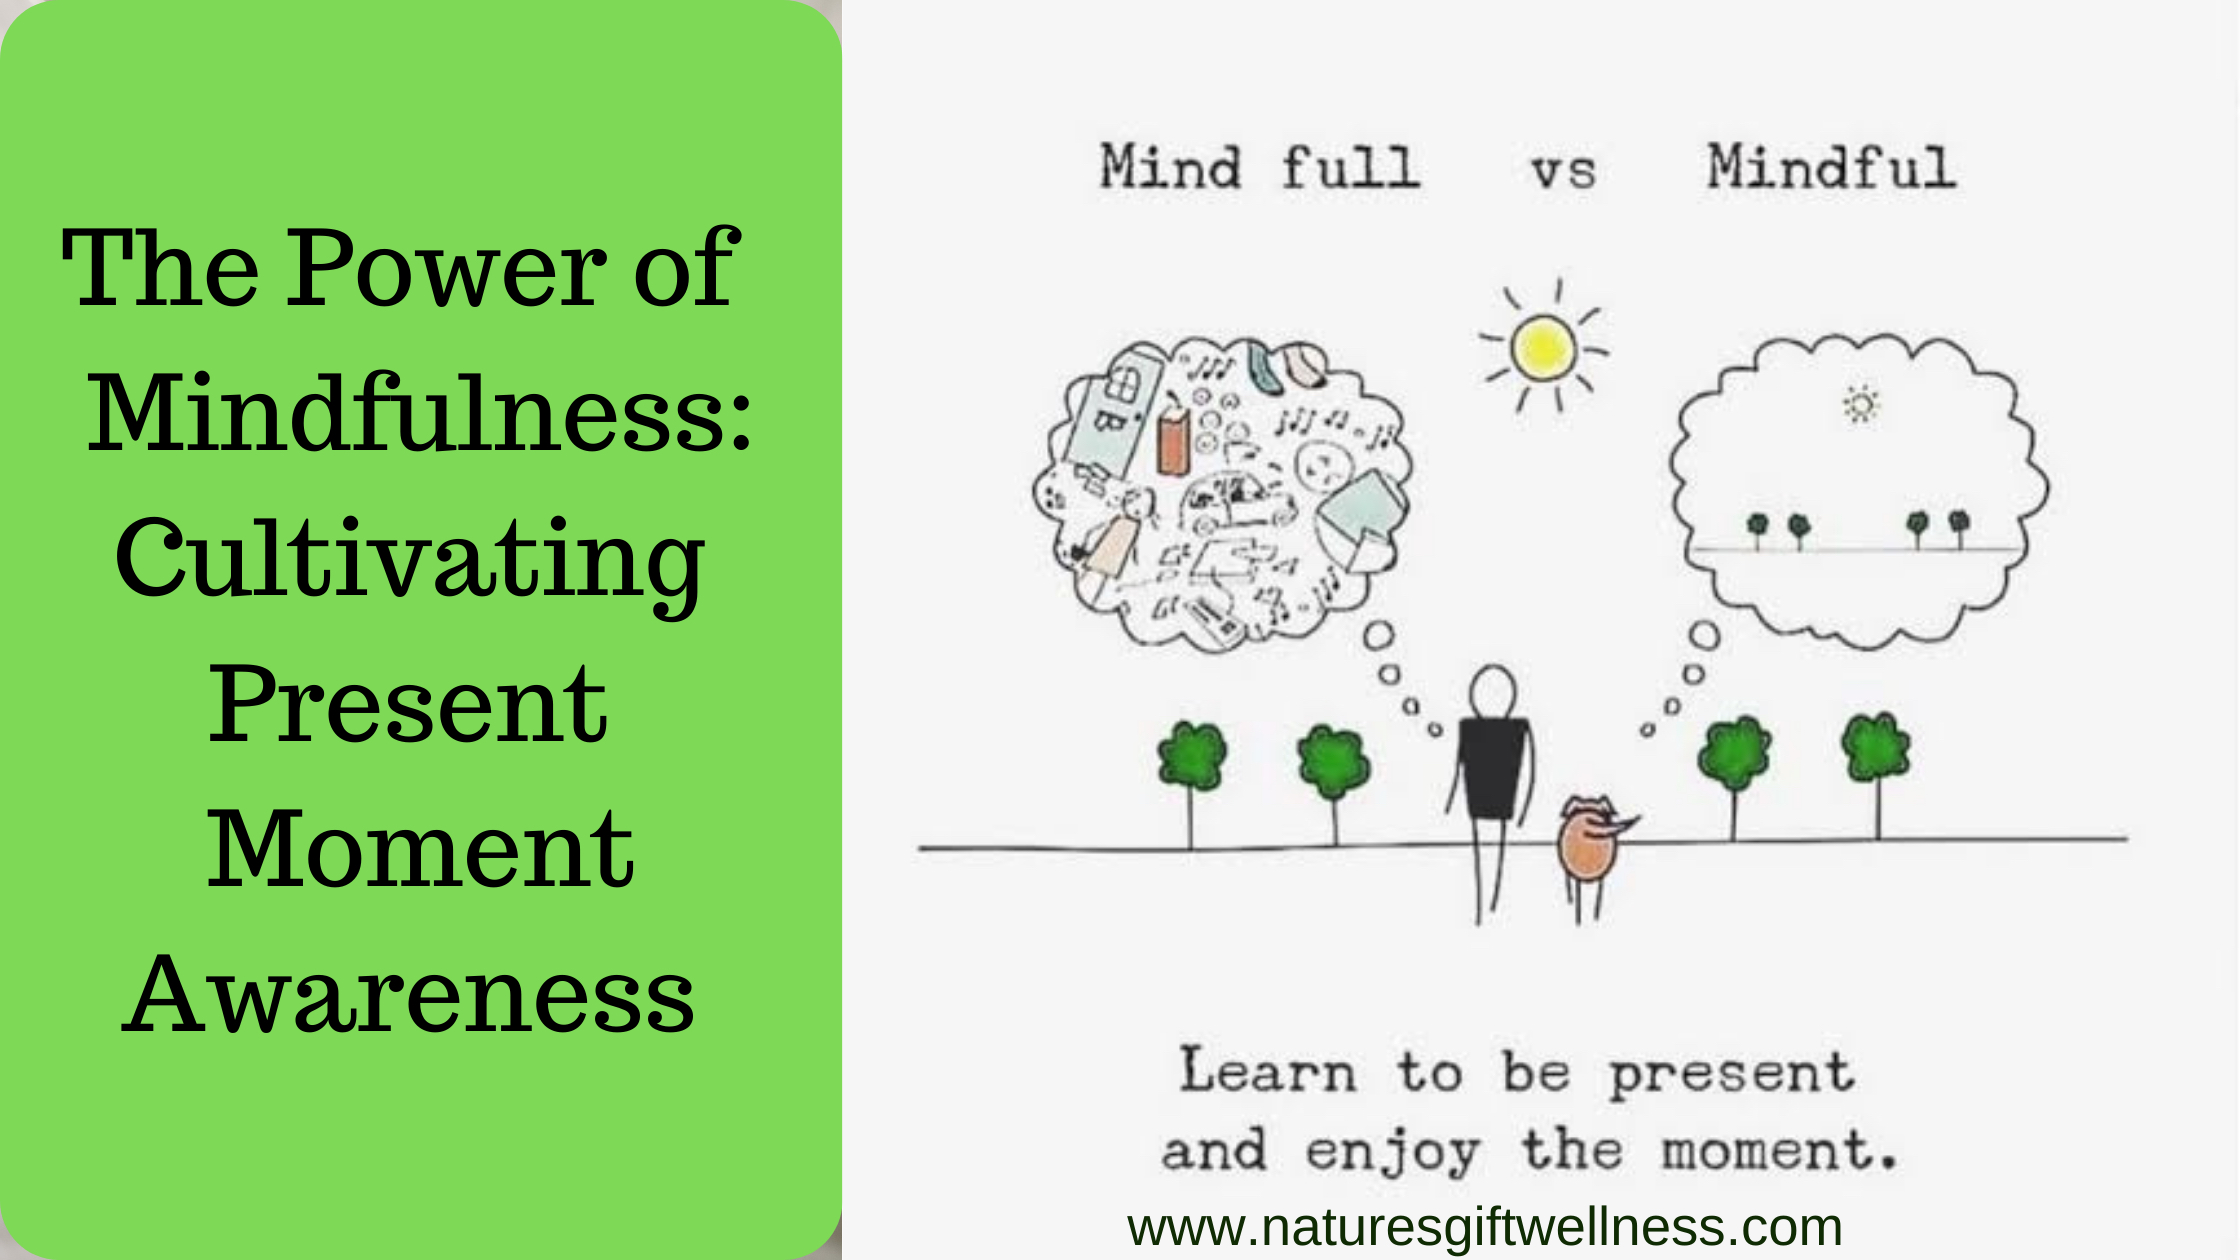 The Power of Mindfulness: Cultivating Present-Moment Awareness